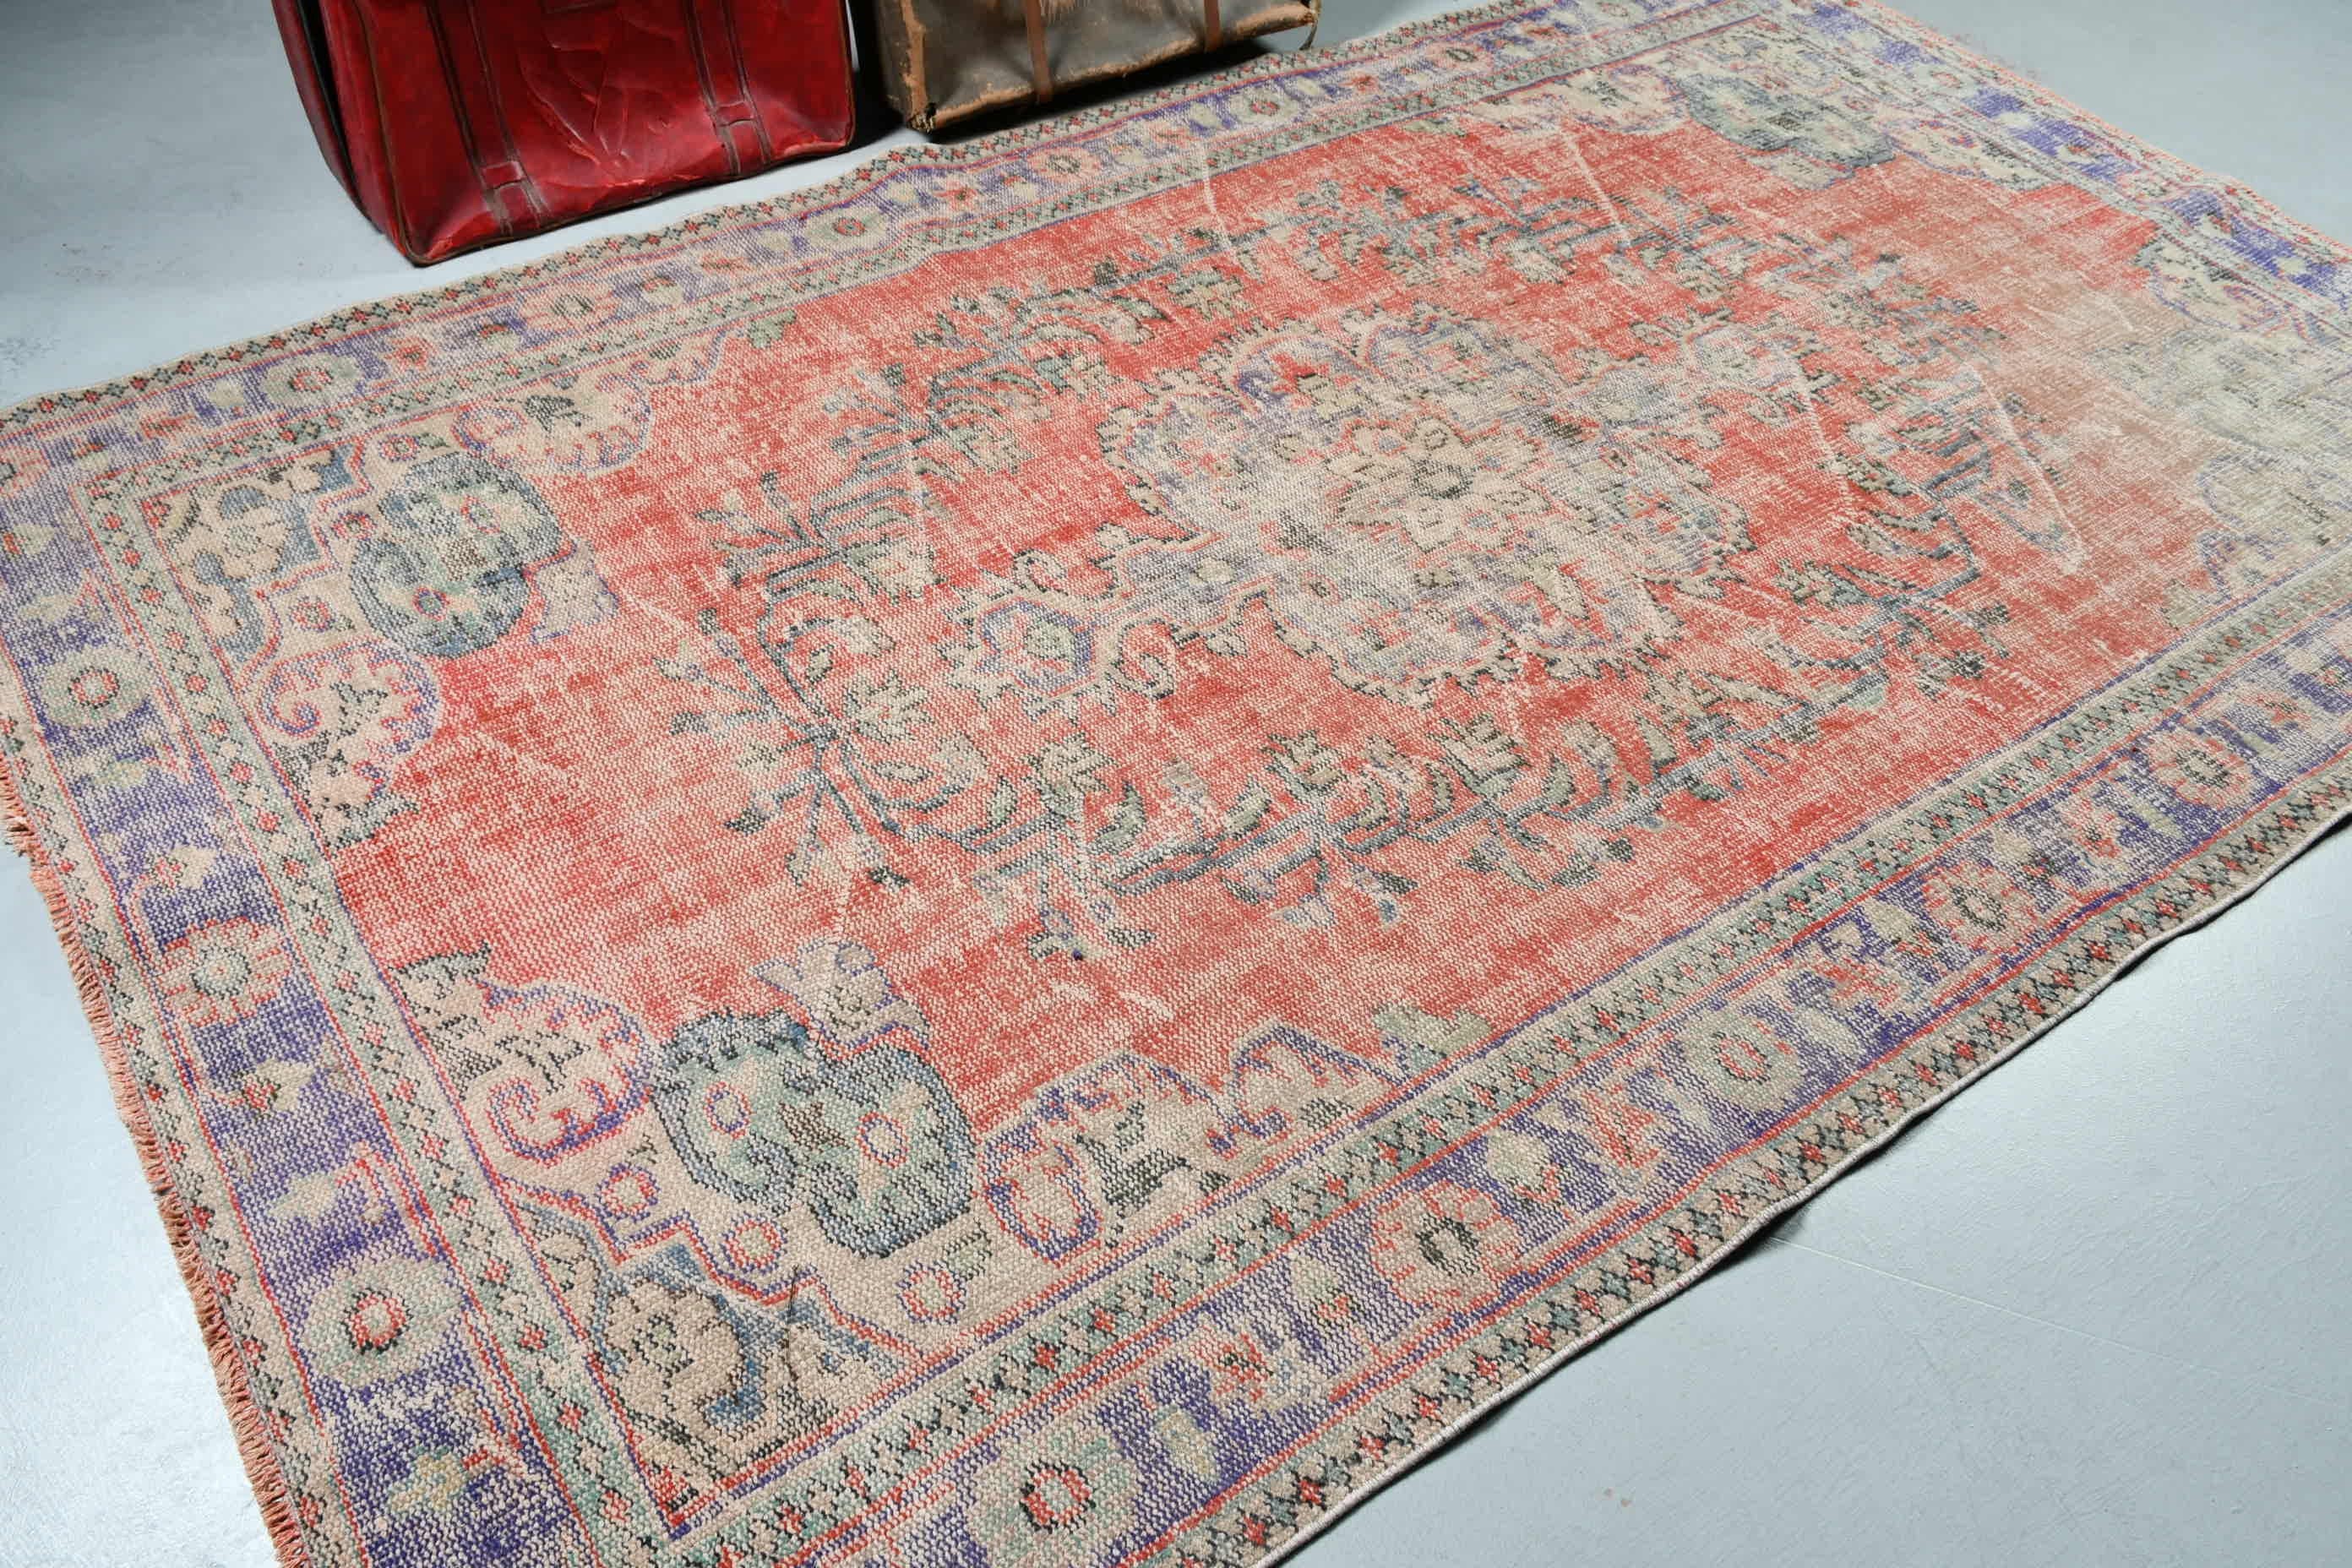 Living Room Rug, Vintage Rugs, Cool Rug, Salon Rugs, Red  5.9x9.6 ft Large Rugs, Rugs for Salon, Turkish Rug